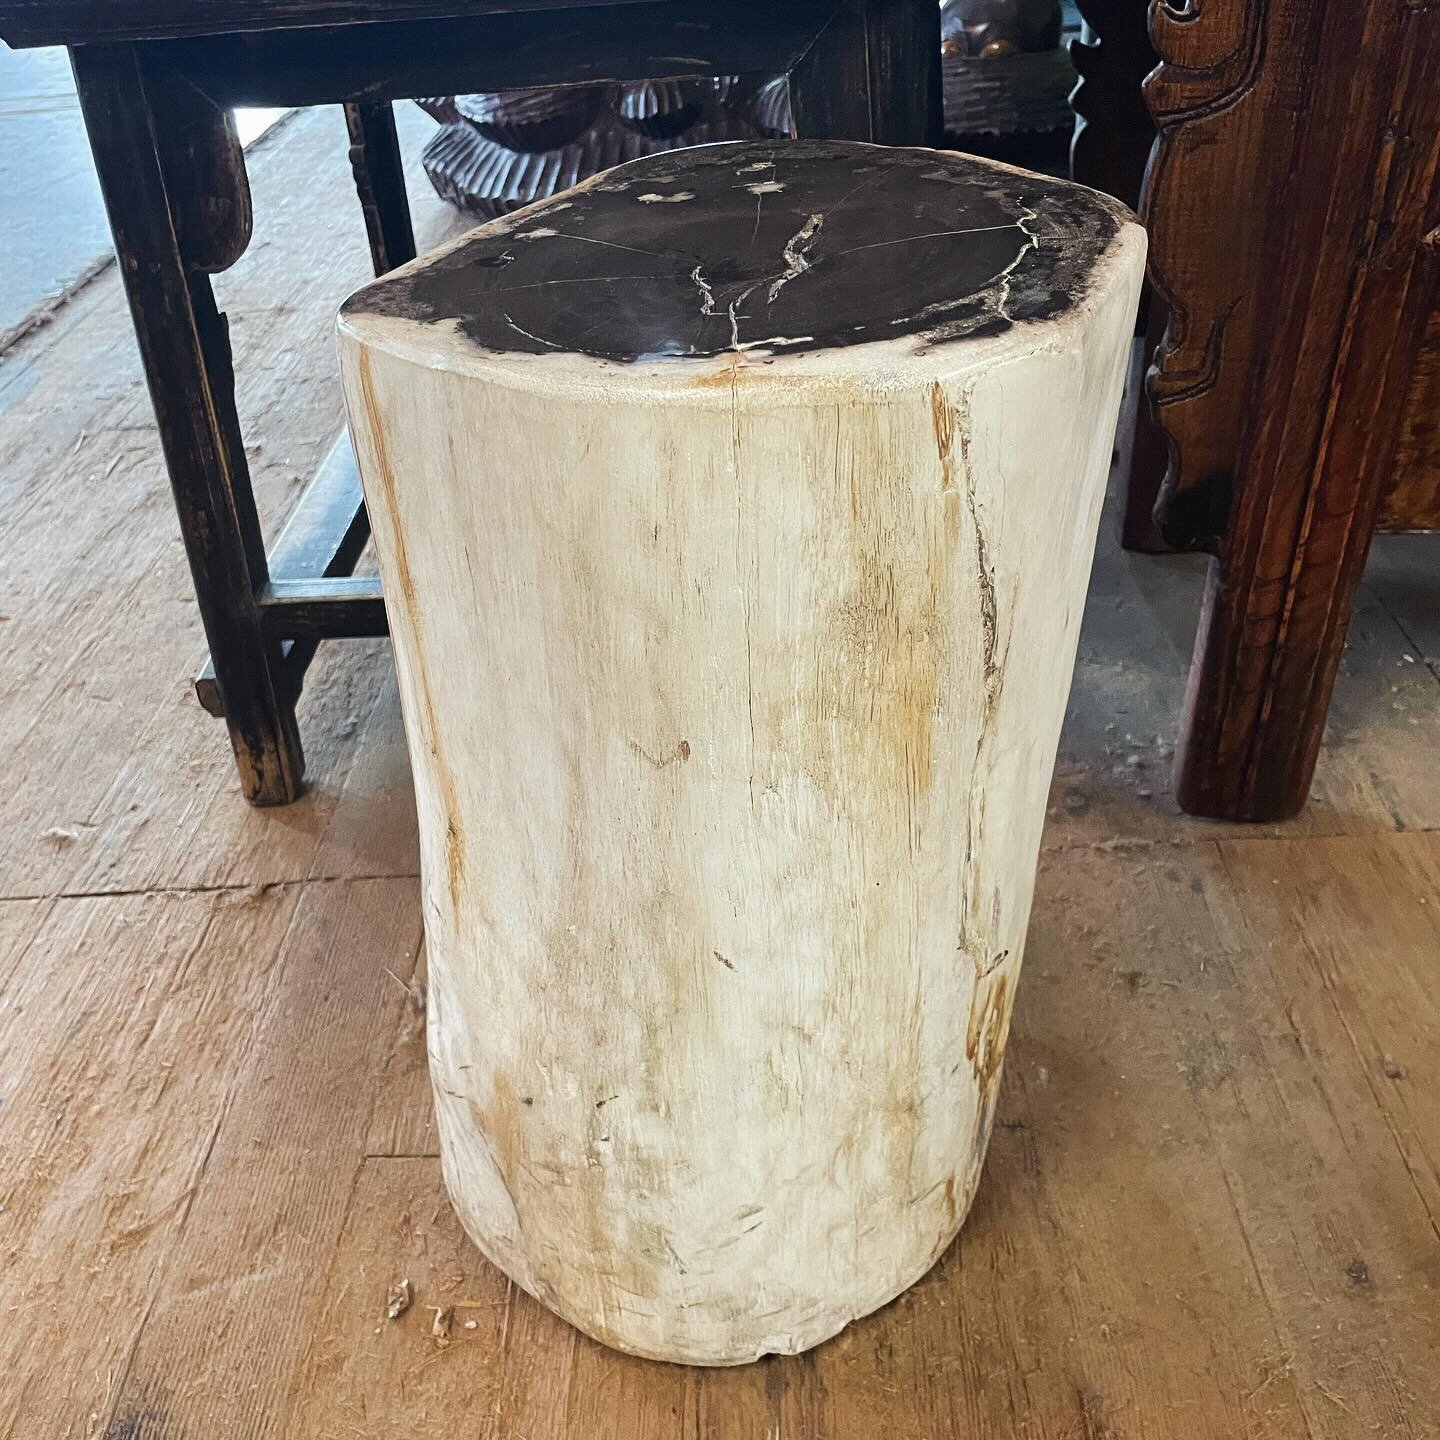 Jepara, Indonesia petrified wood side table in beautiful condition.  Originally $700 now on sale for $350! 
Dimensions: D11&rdquo; x H17&rdquo; #petrifiedwood #oneofakindfurniture #asianantiquefurniture #interiordesign